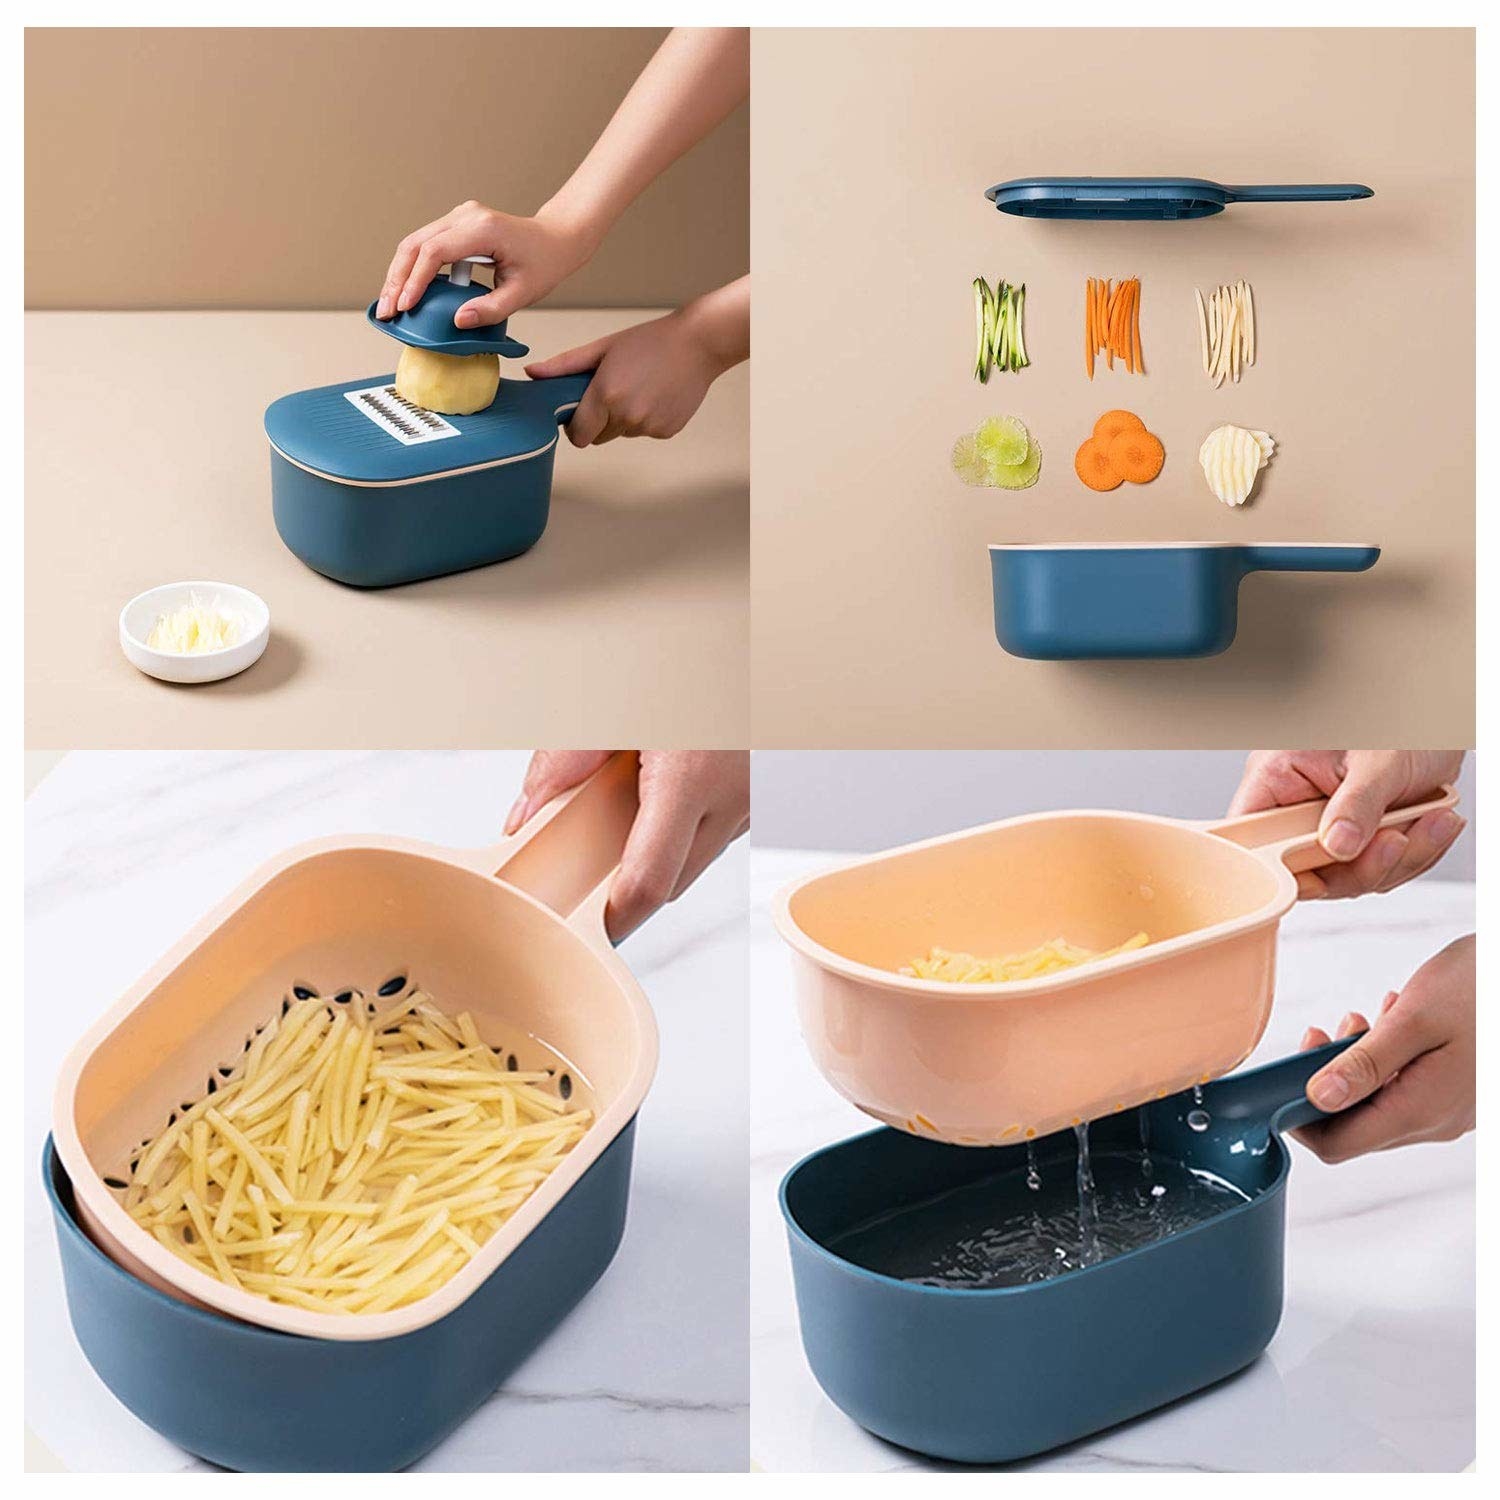 4 different images showing different uses of the appliance to chop, grate, strain and store food